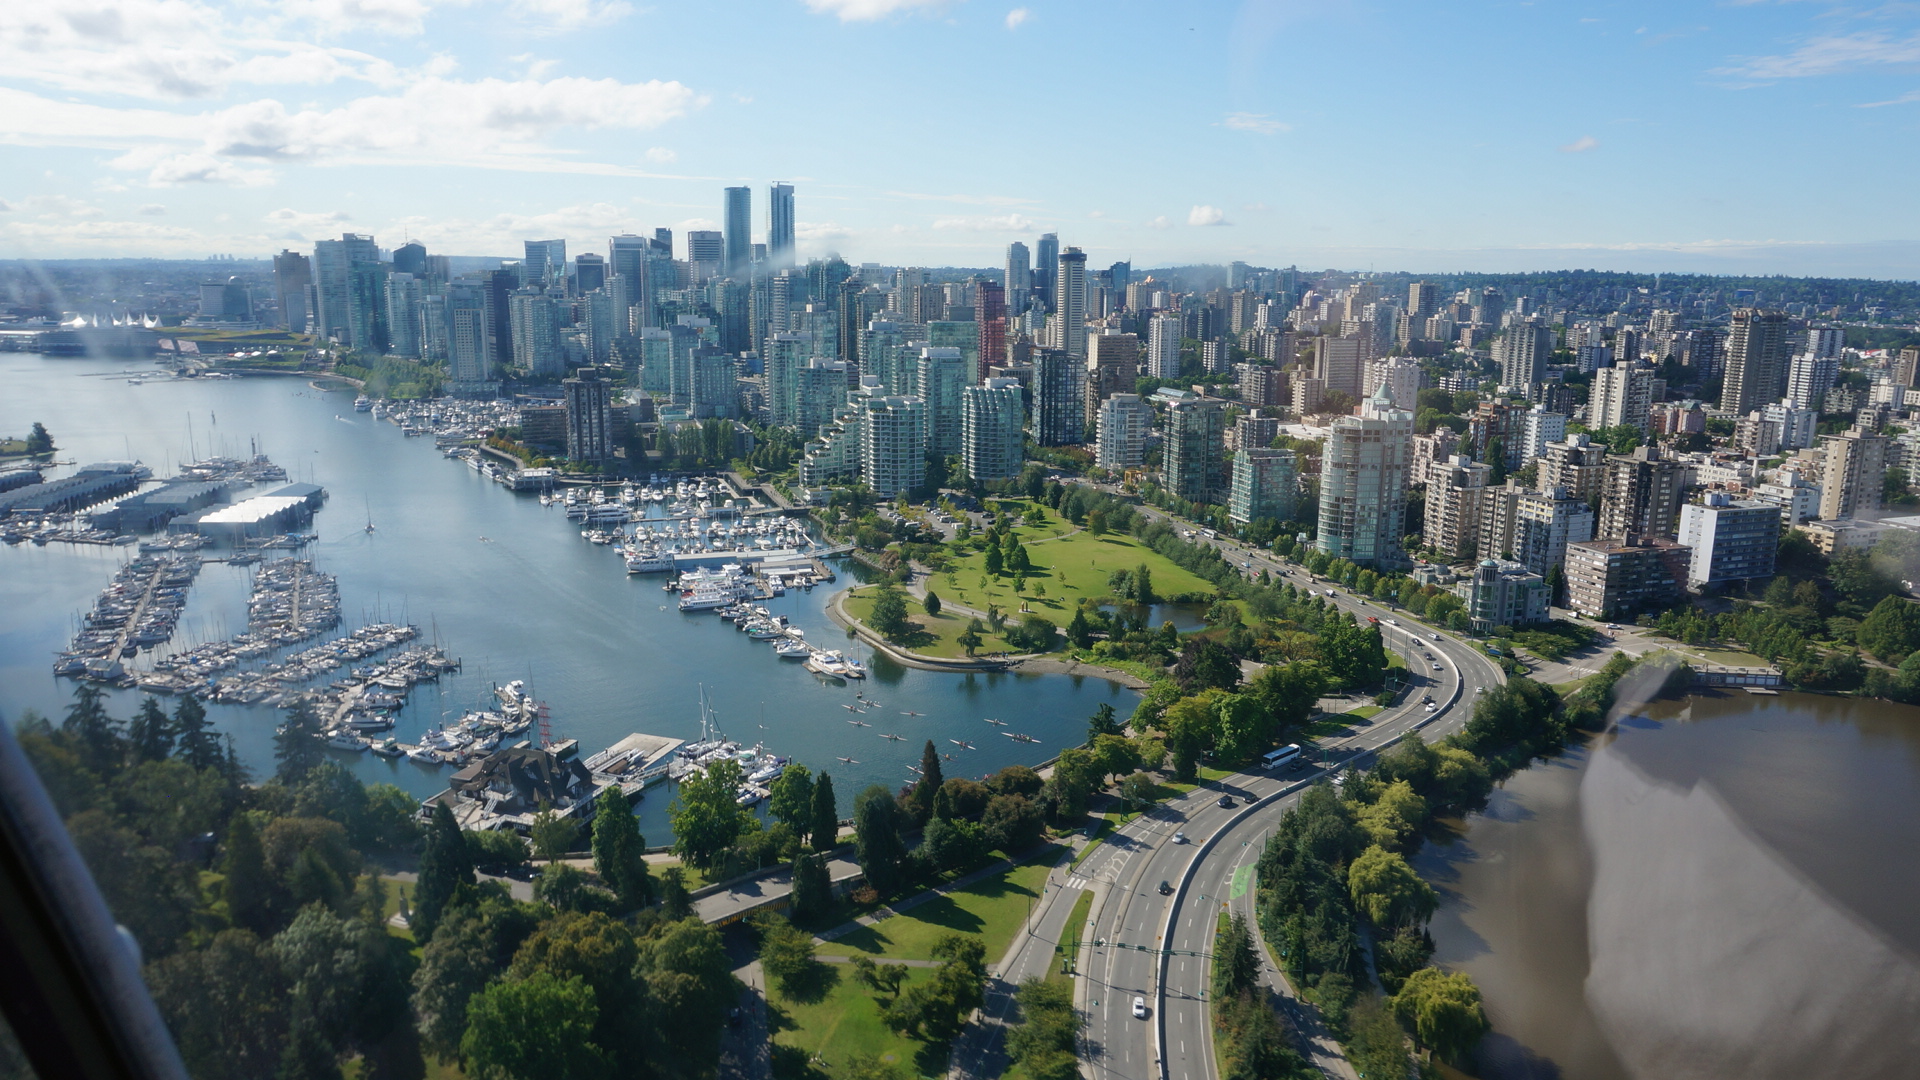 Vancouver is a picture perfect city with mountain views from every inch of town and is a great starting point for your Canadian road trip.